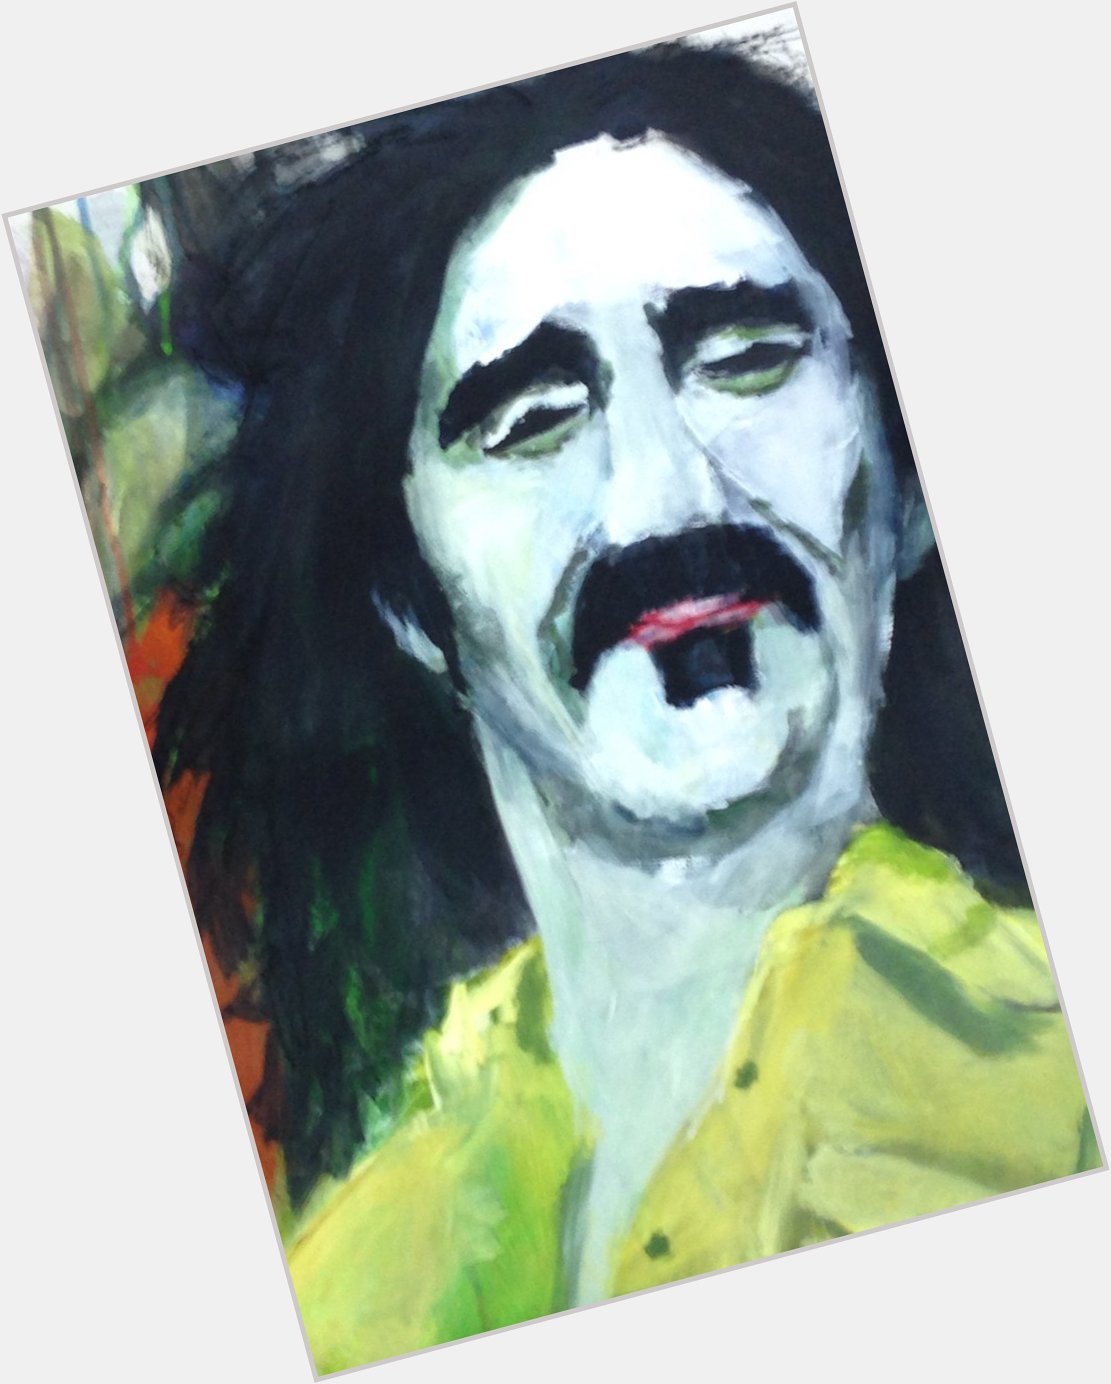 21th of december birthday of Frank Zappa. He is so happy in 